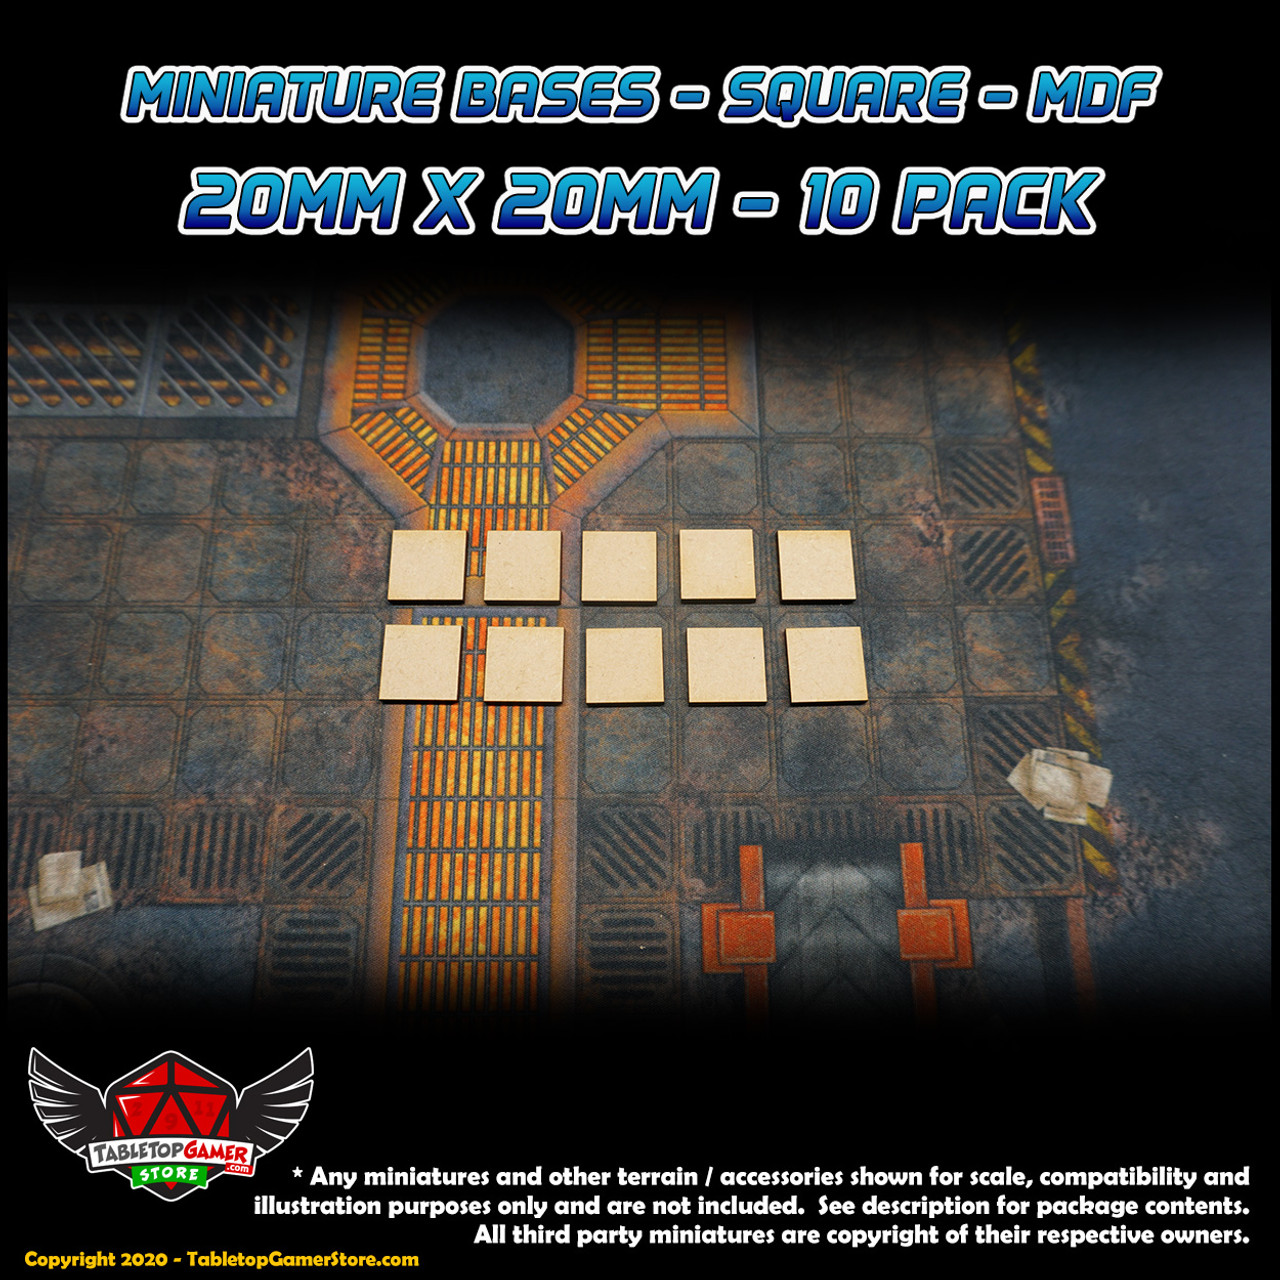 Miniature Bases - Square - MDF - 20mm x20mm - 10 Pack